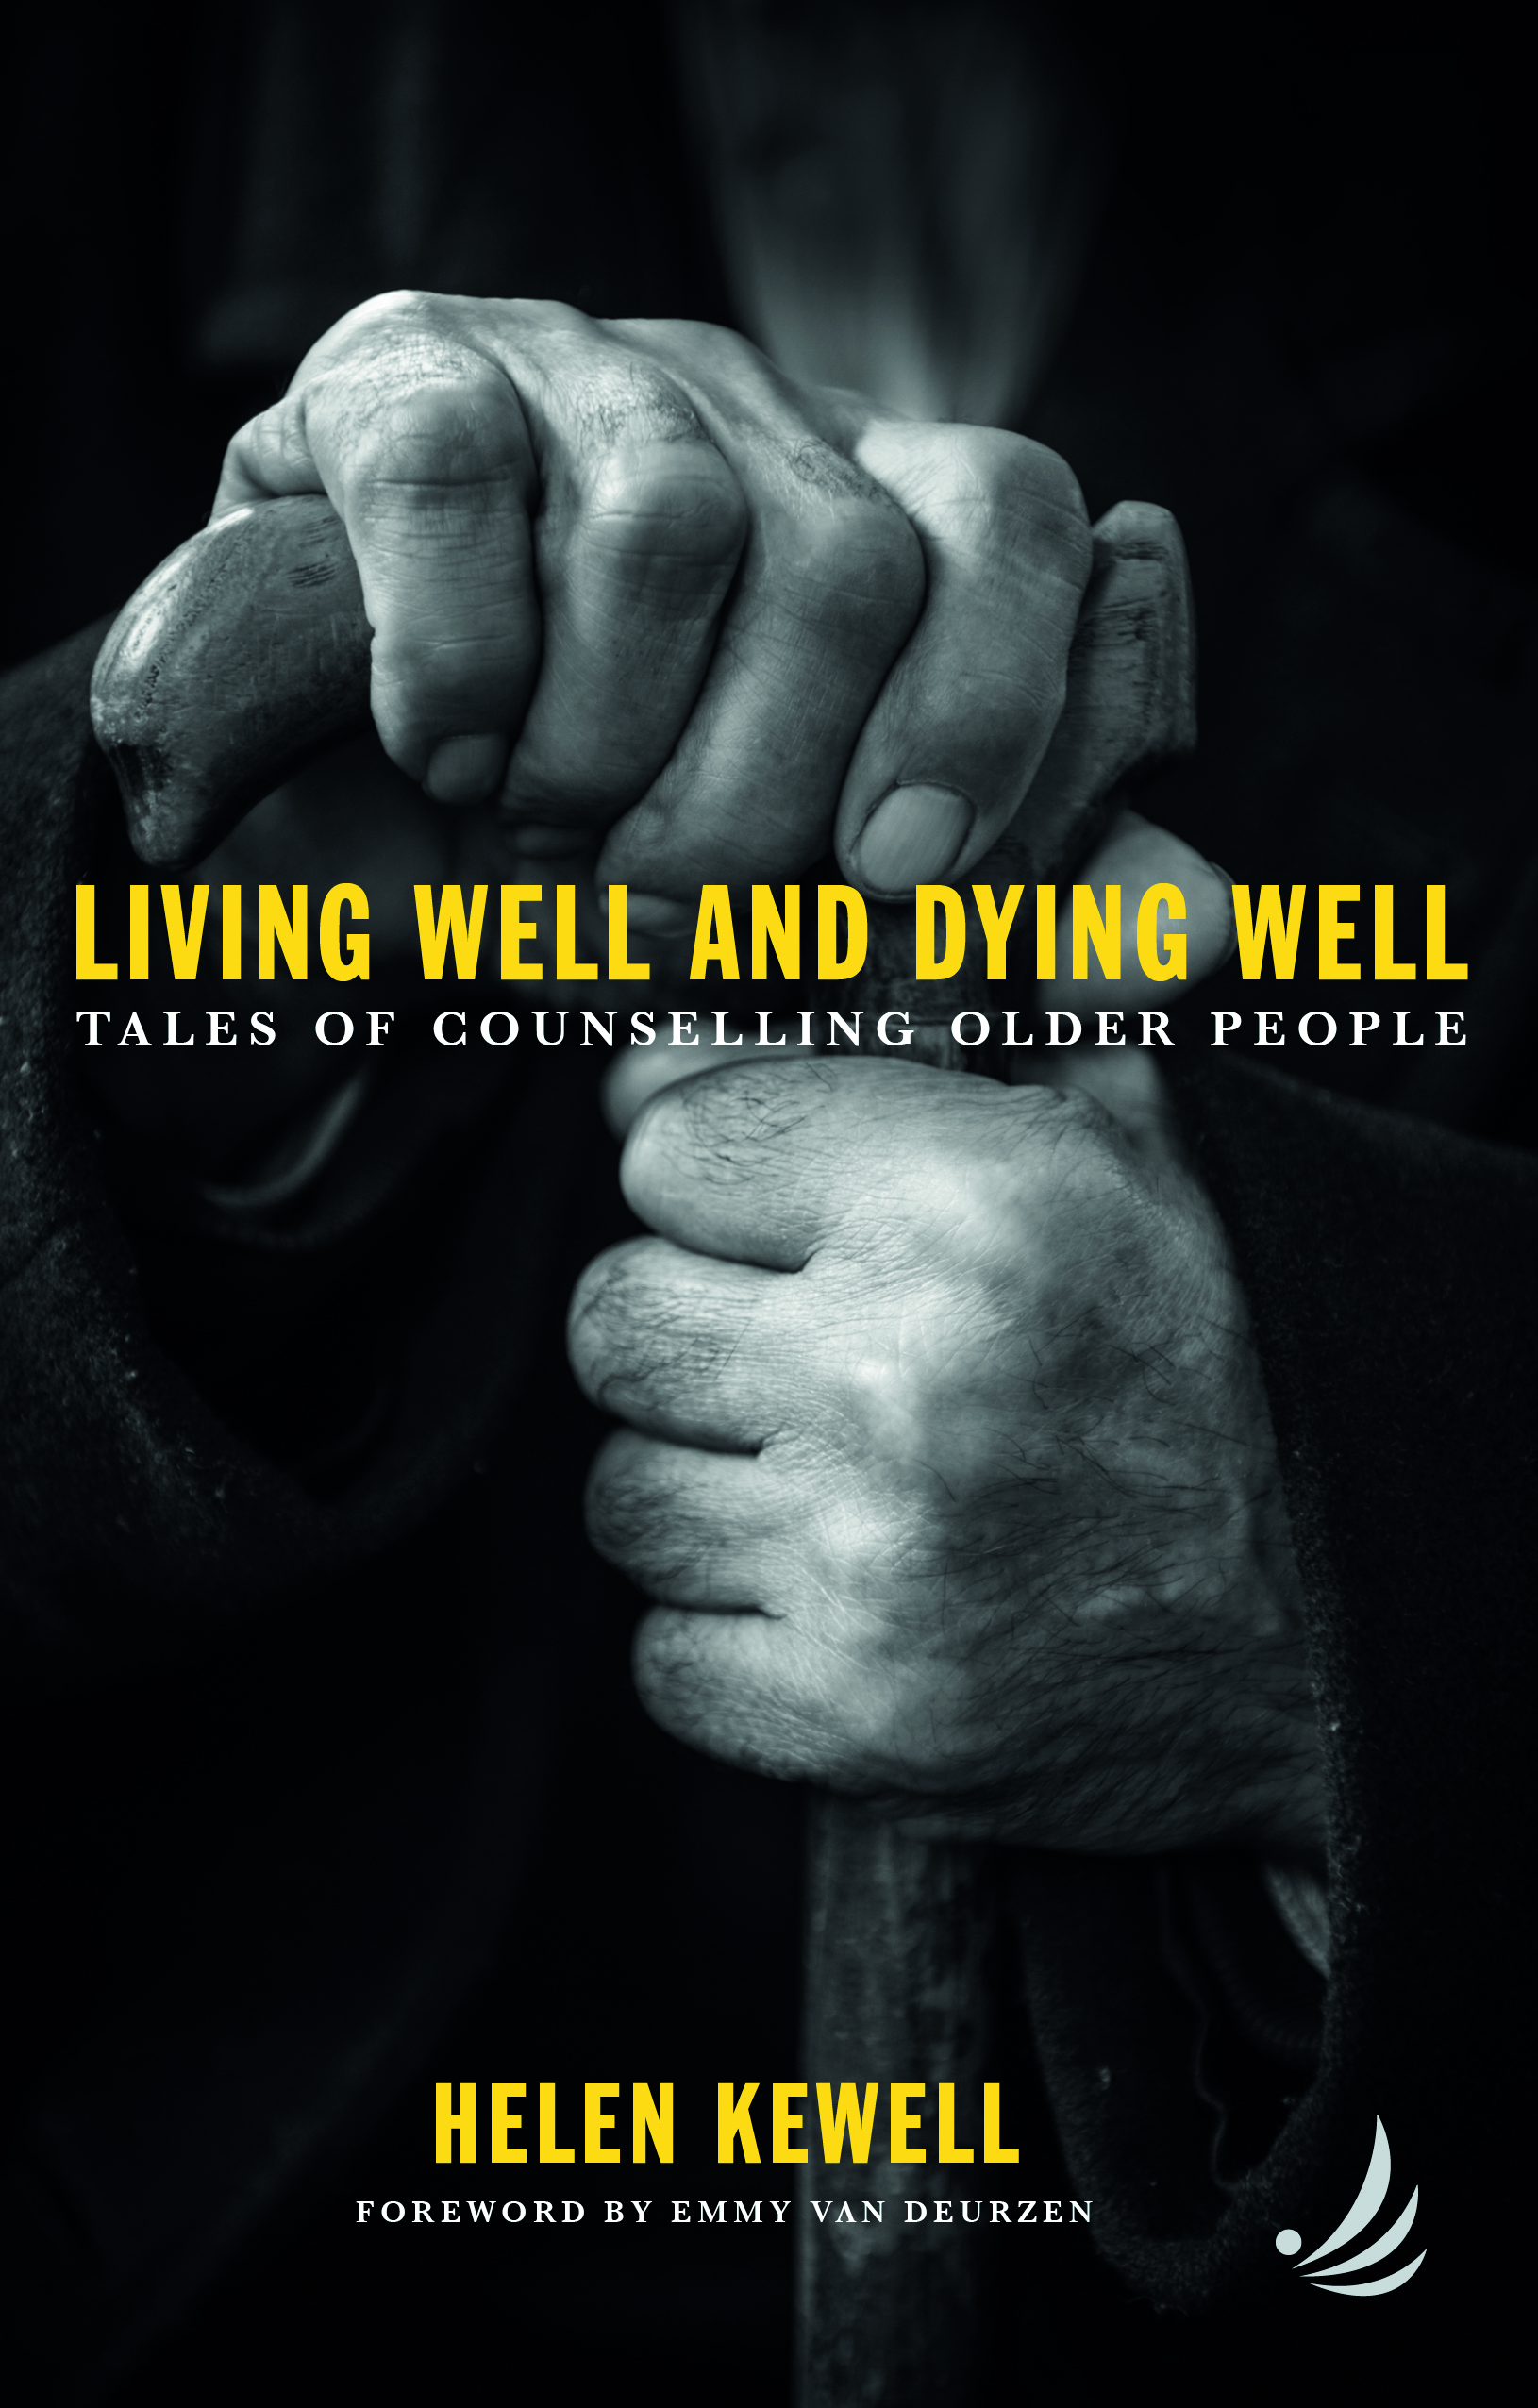 Living Well And Dying Well: Counselling Older People - Helen Kewell with Onlinevents